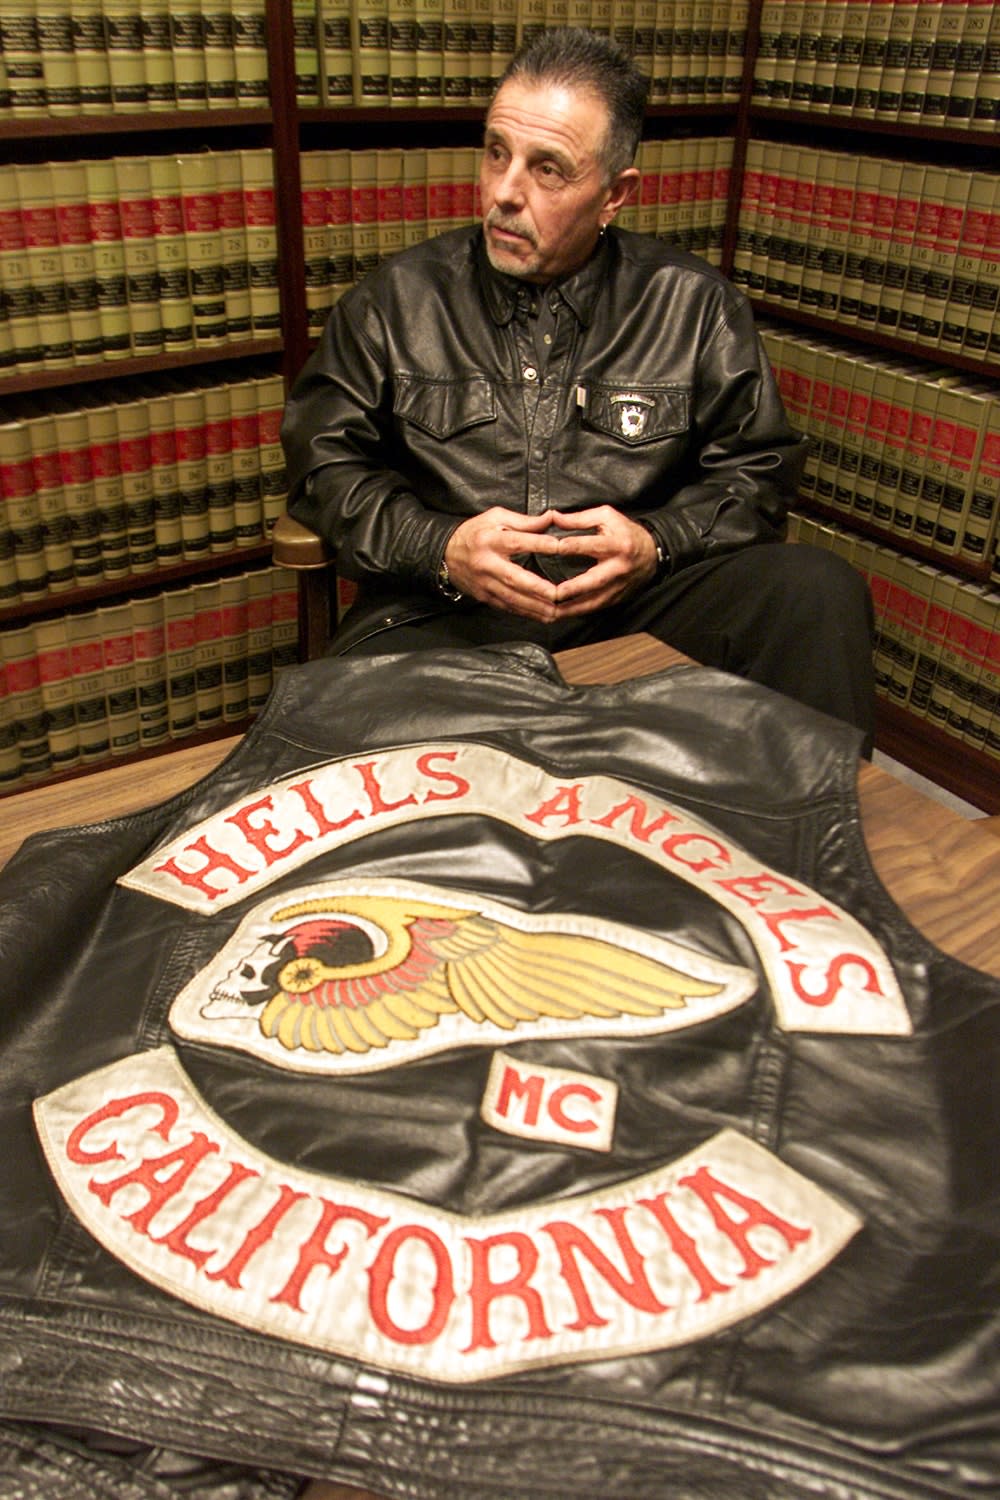 George Christie sitting in front of a Hells Angels patch